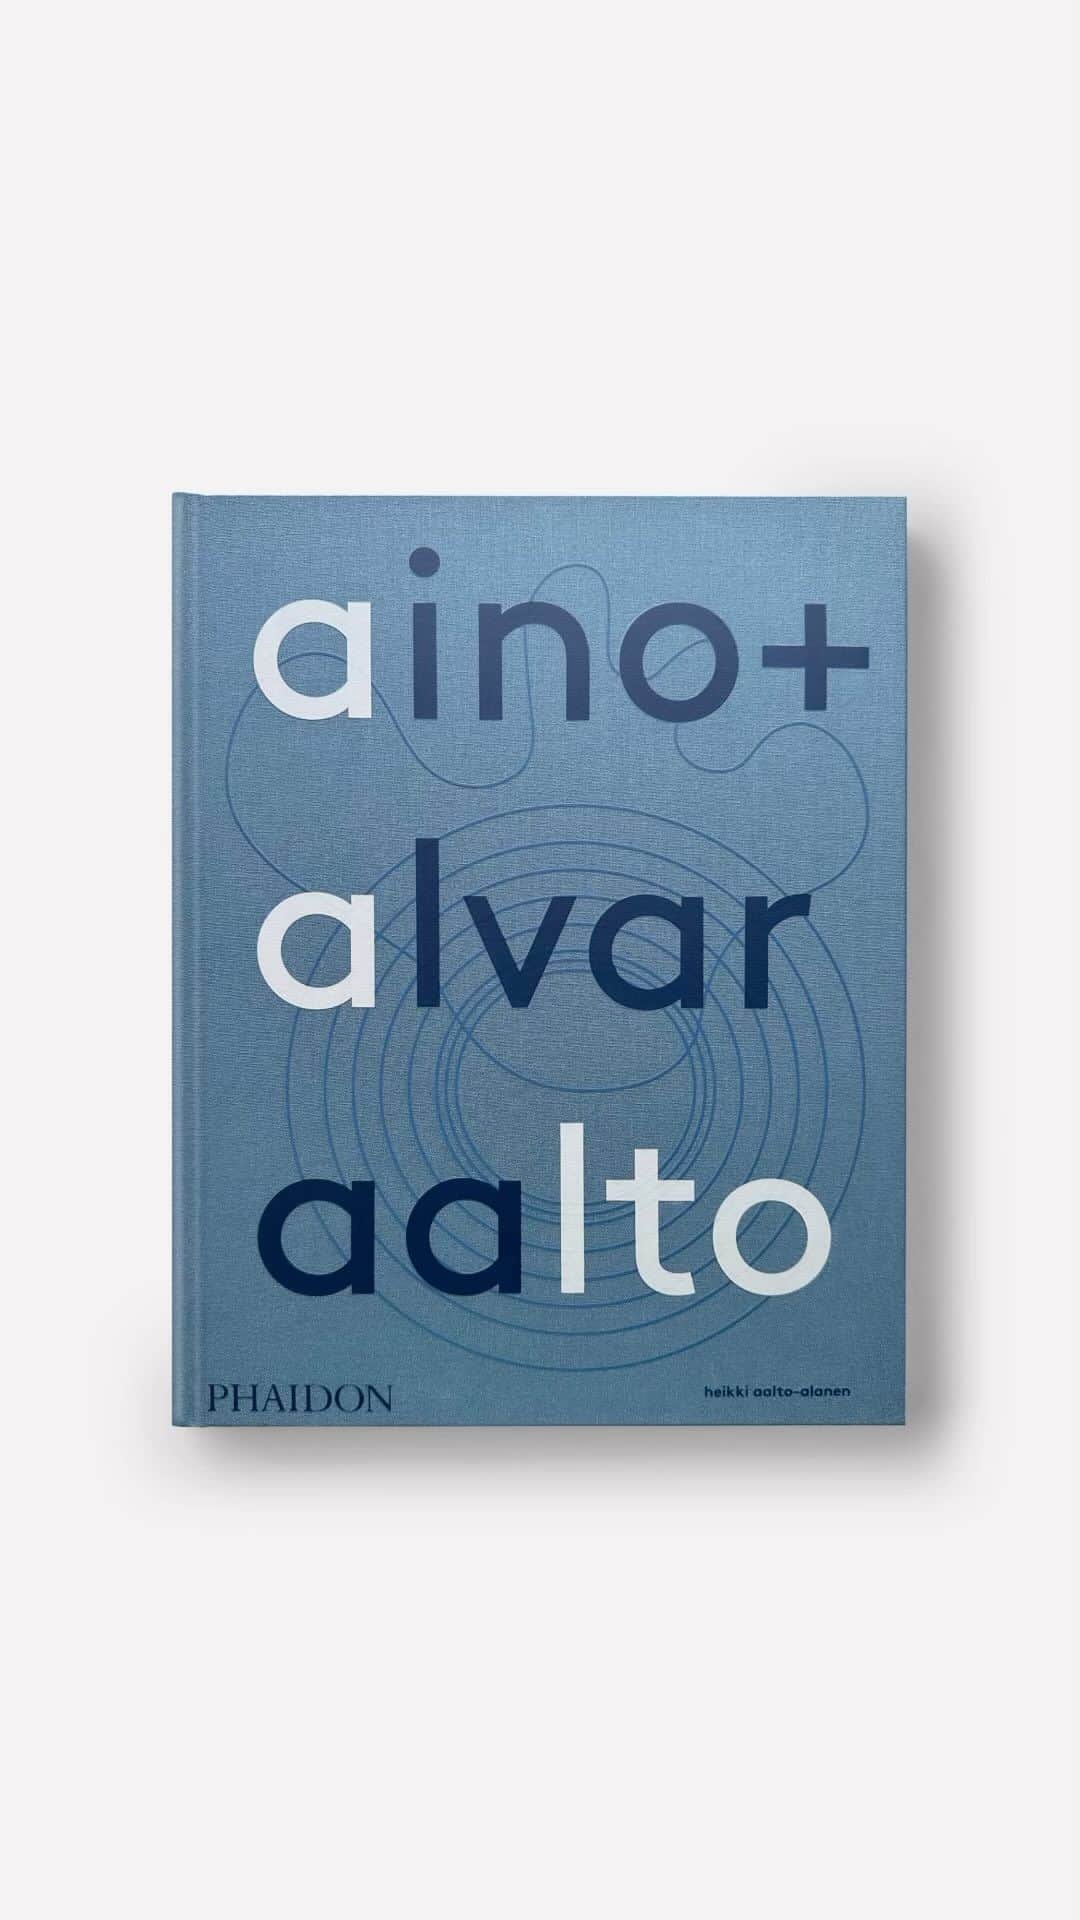 Artekのインスタグラム：「Aino and Alvar Aalto together founded Artek and created some of the most celebrated objects and buildings of the 20th century.   In ‘Aino + Alvar Aalto: A Life Together’ by @heikkiaaltoalanen, Alvar and Aino’s grandson illustrates their story through letters, documents, drawings, and family photographs, drawing on many of the never-before-published letters they sent to each other and to family, friends, and colleagues, until Aino’s death in 1949.   📘Available now from @phaidonpress.」